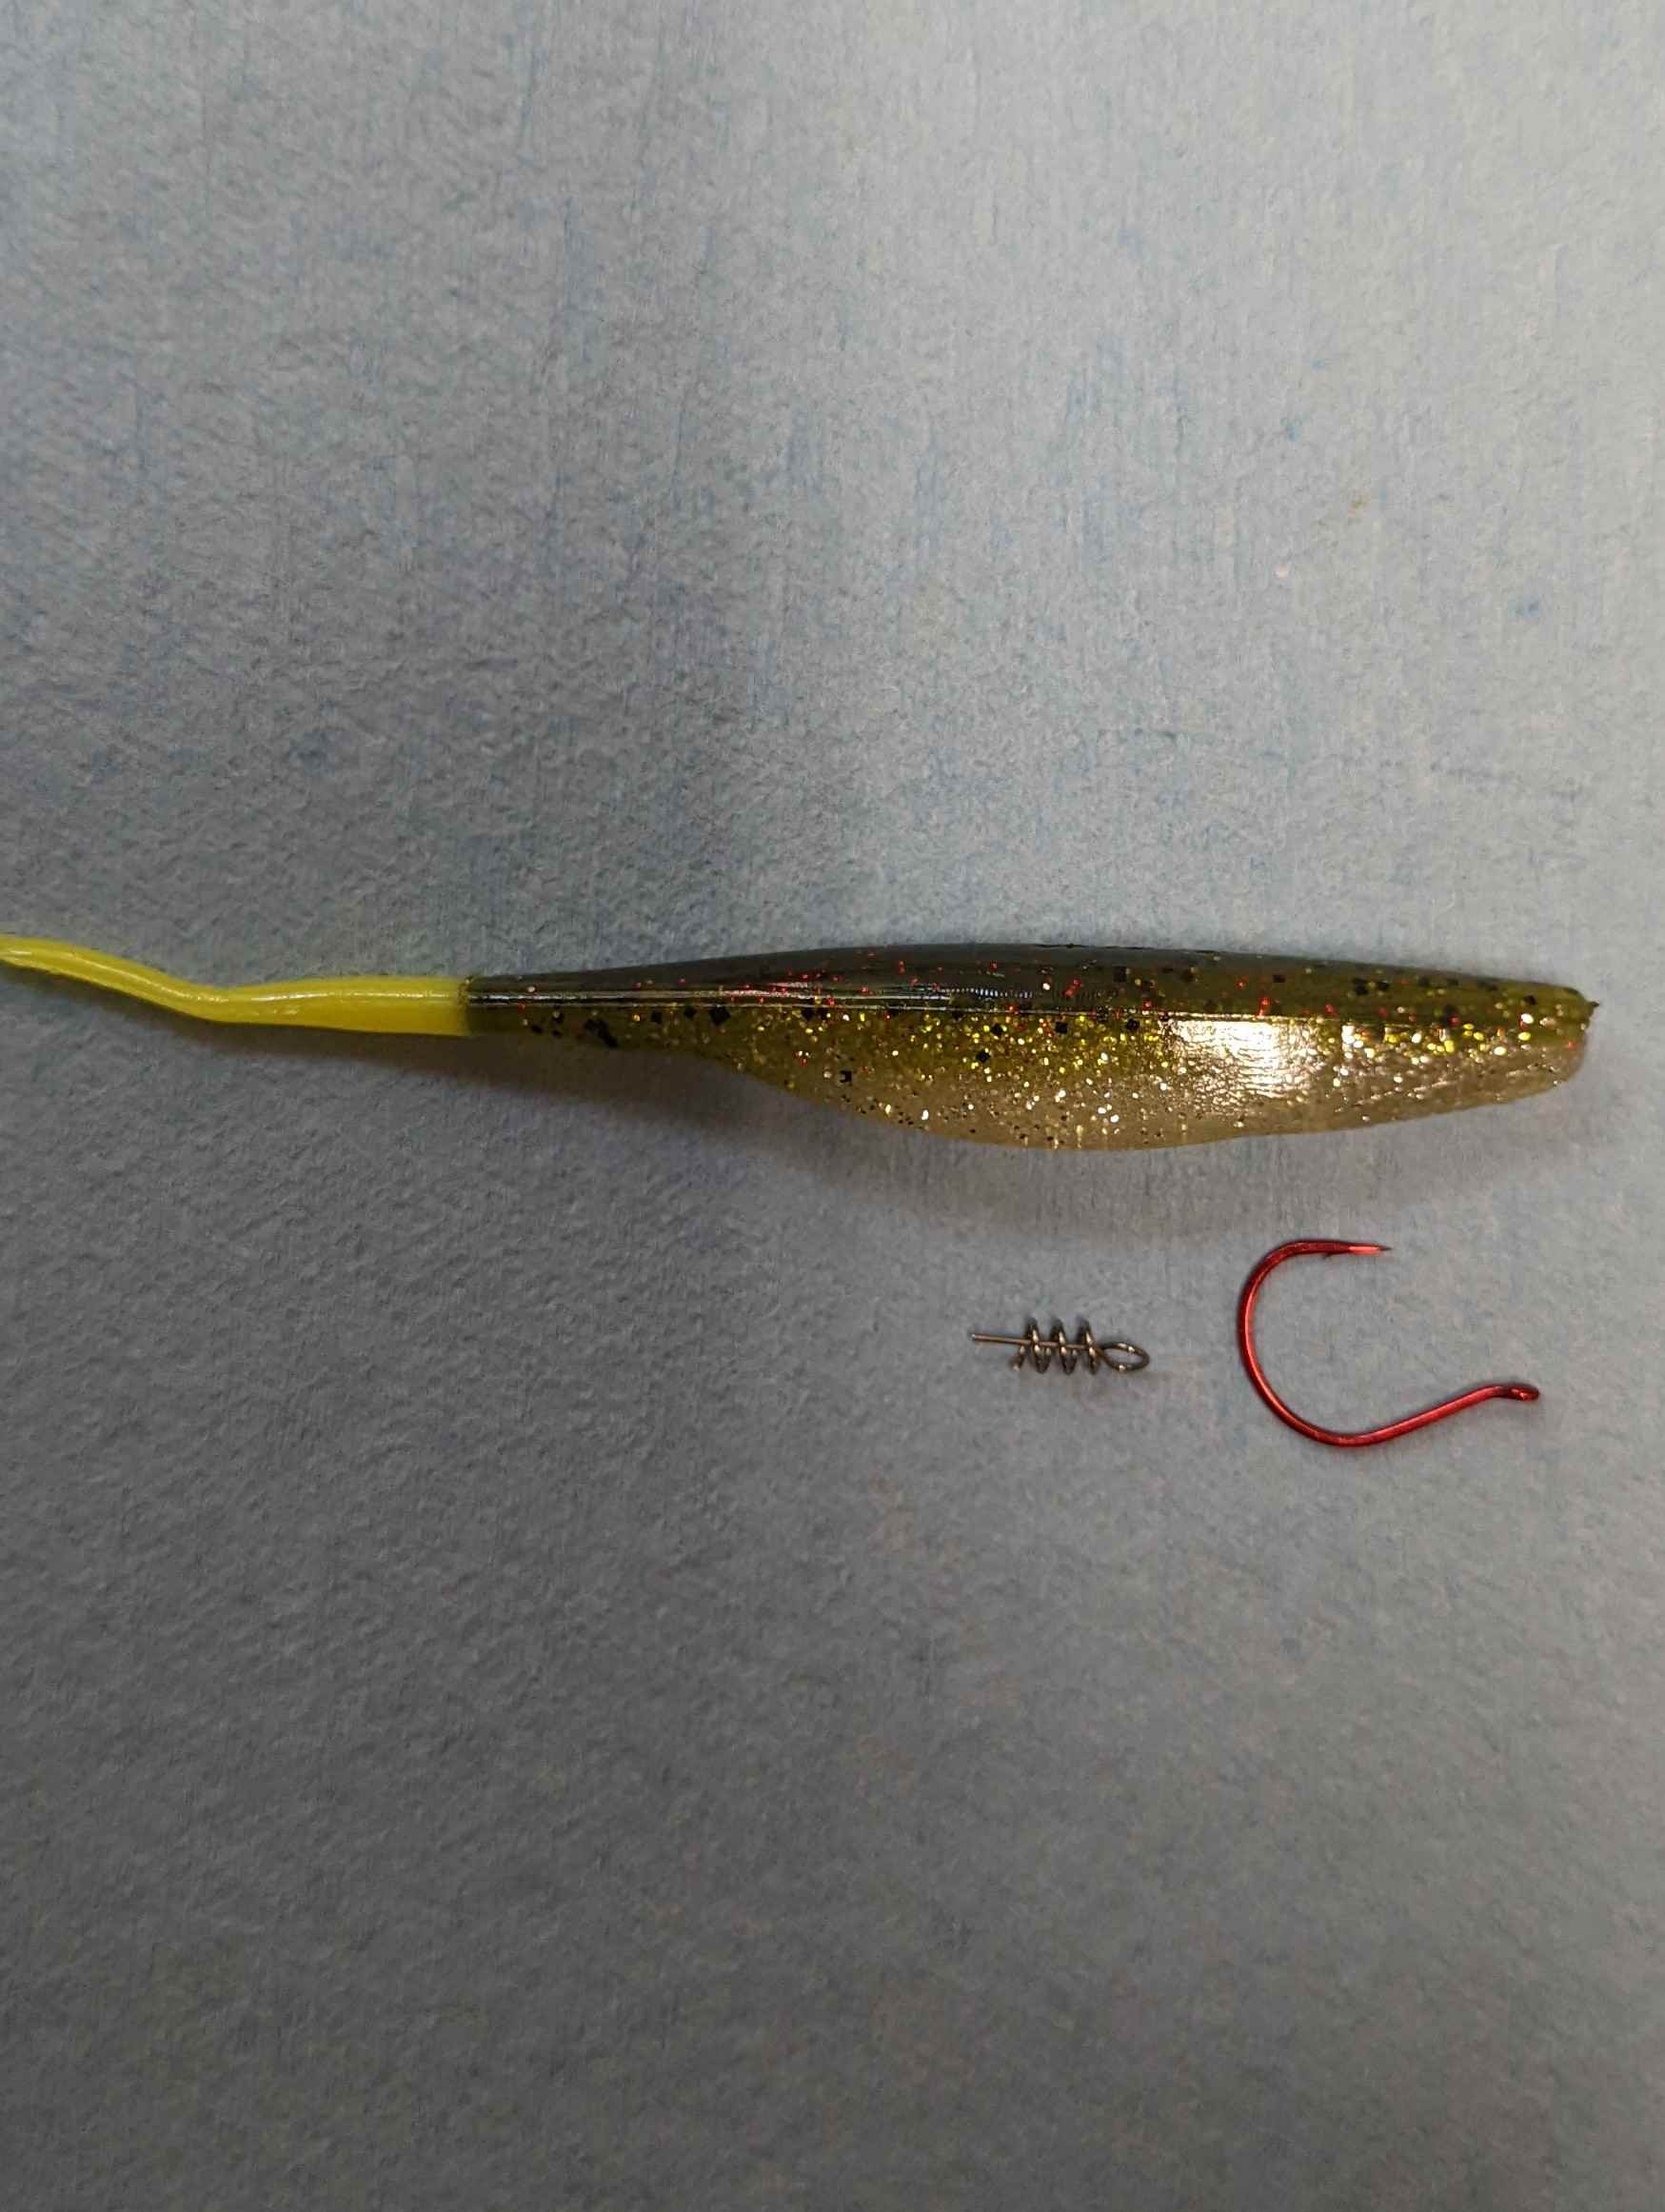 Fluke hook-up ratio problems - when to set the hook? - Fishing Tackle -  Bass Fishing Forums